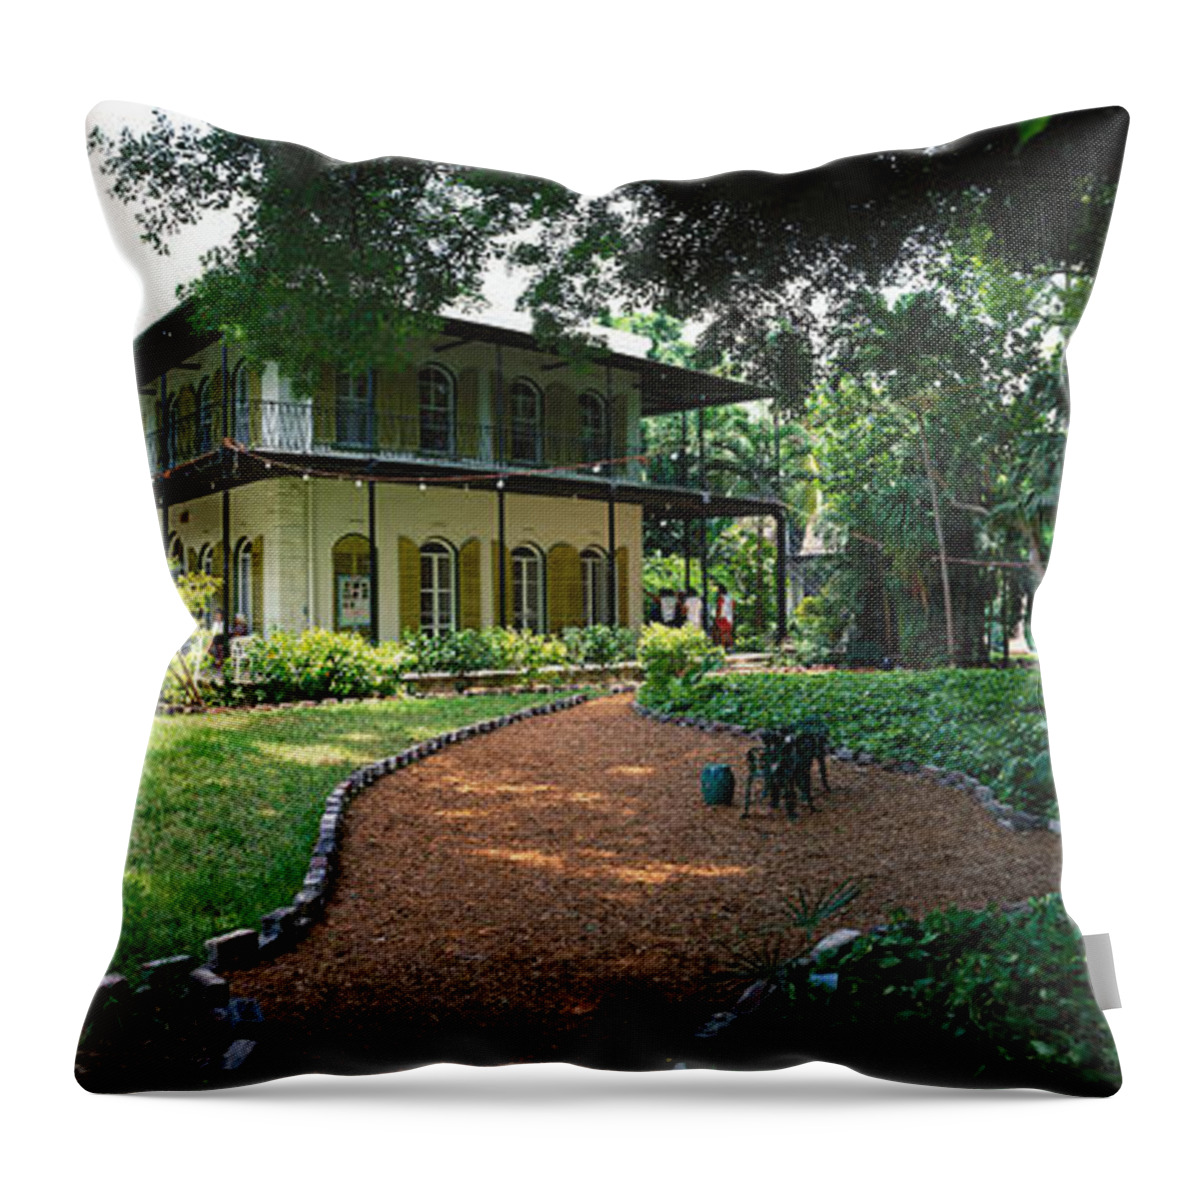 Photography Throw Pillow featuring the photograph Usa, Florida, Key West, Ernest by Panoramic Images